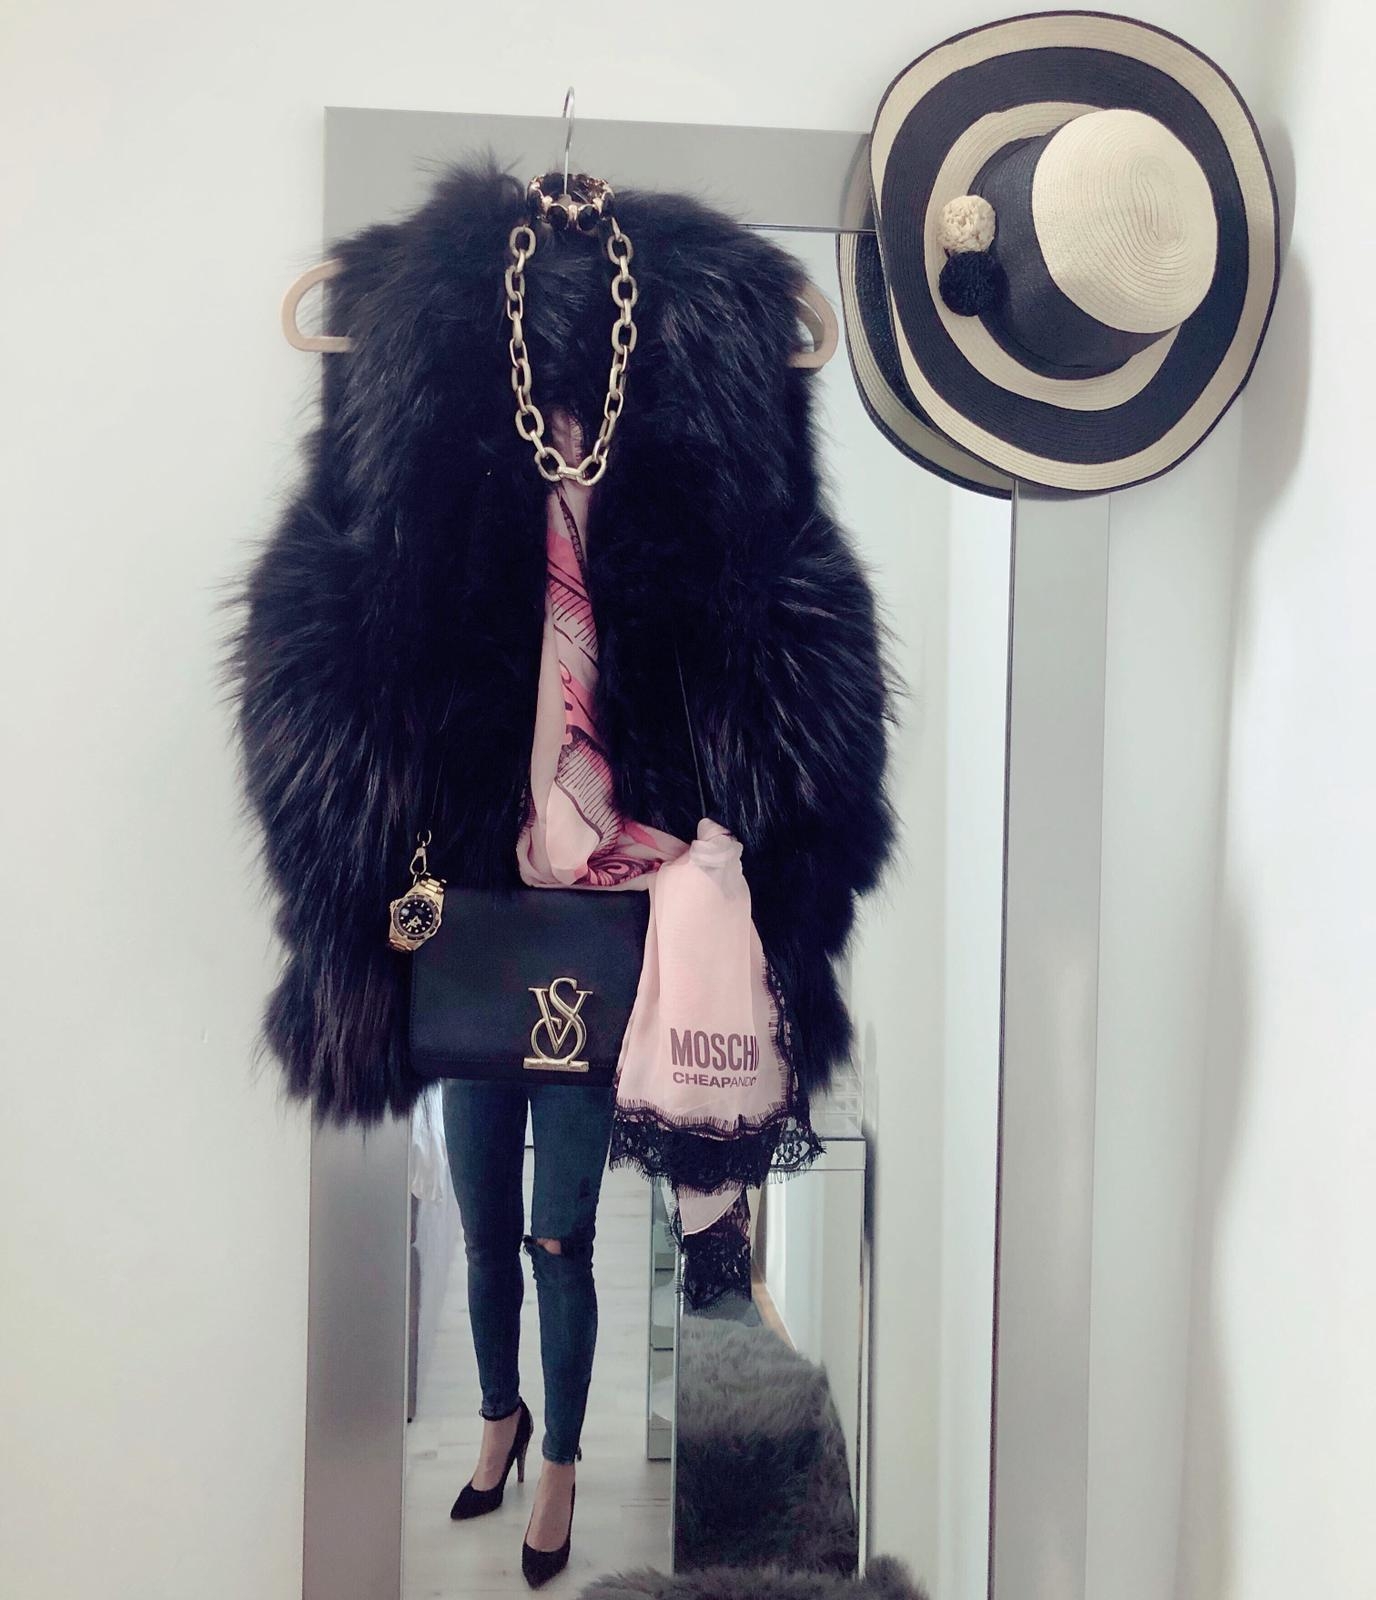 "Stylery"  
#outfit #outfitinspo #lifestyle #mystyle #streetlook #womanslook #dressroom